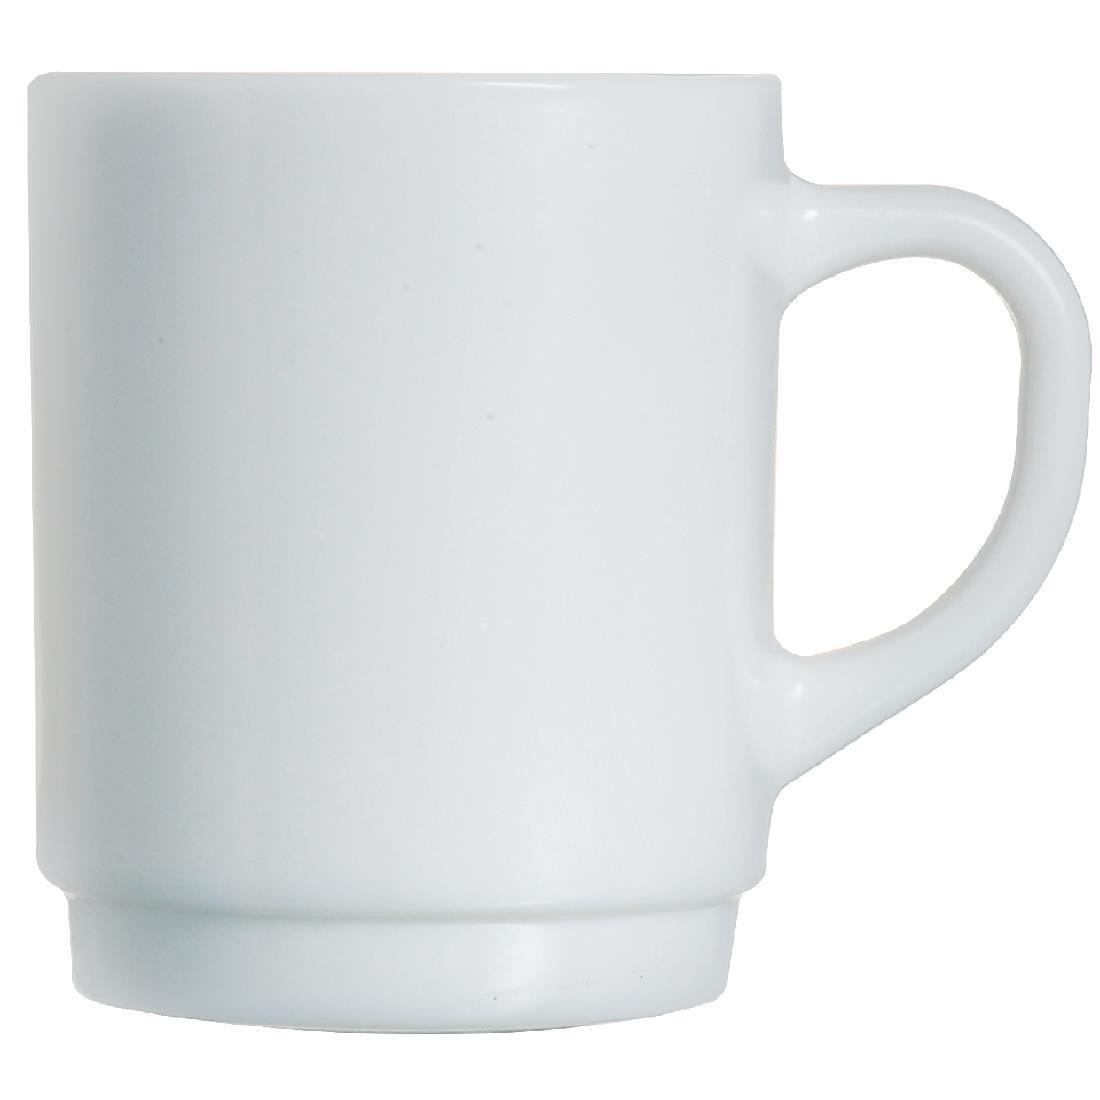 Arcoroc Opal Stackable Mugs 250ml (Pack of 6) - DP077  - 1